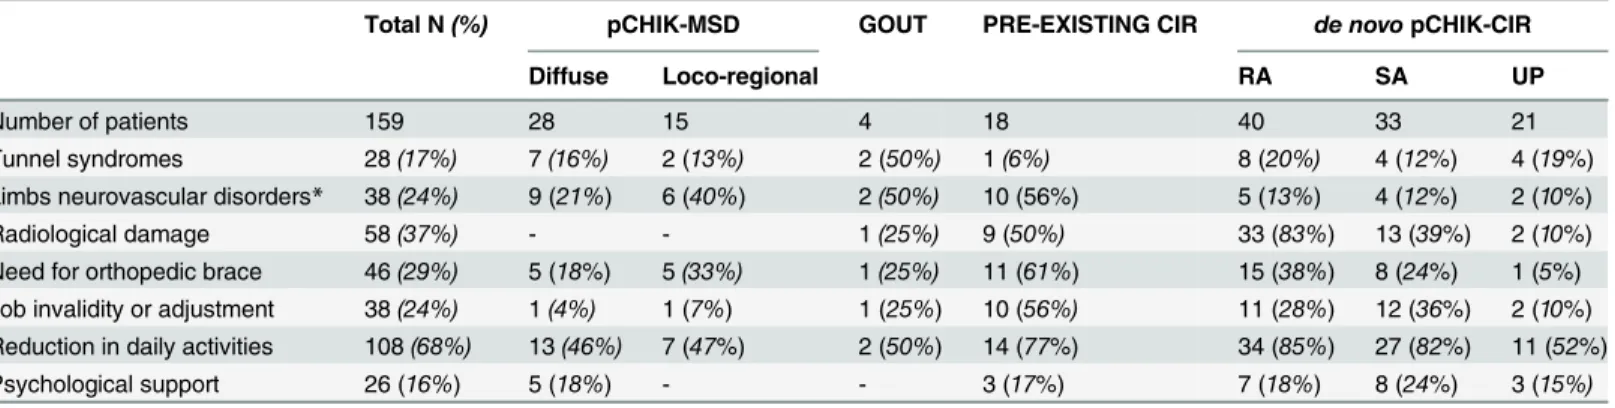 Table 4. Medical features in the different groups of post-chikungunya rheumatic and musculoskeletal disorders in patients referred to a rheumatologist for persisting pains, Saint-Denis, Reunion Island, 2006 – 2012.